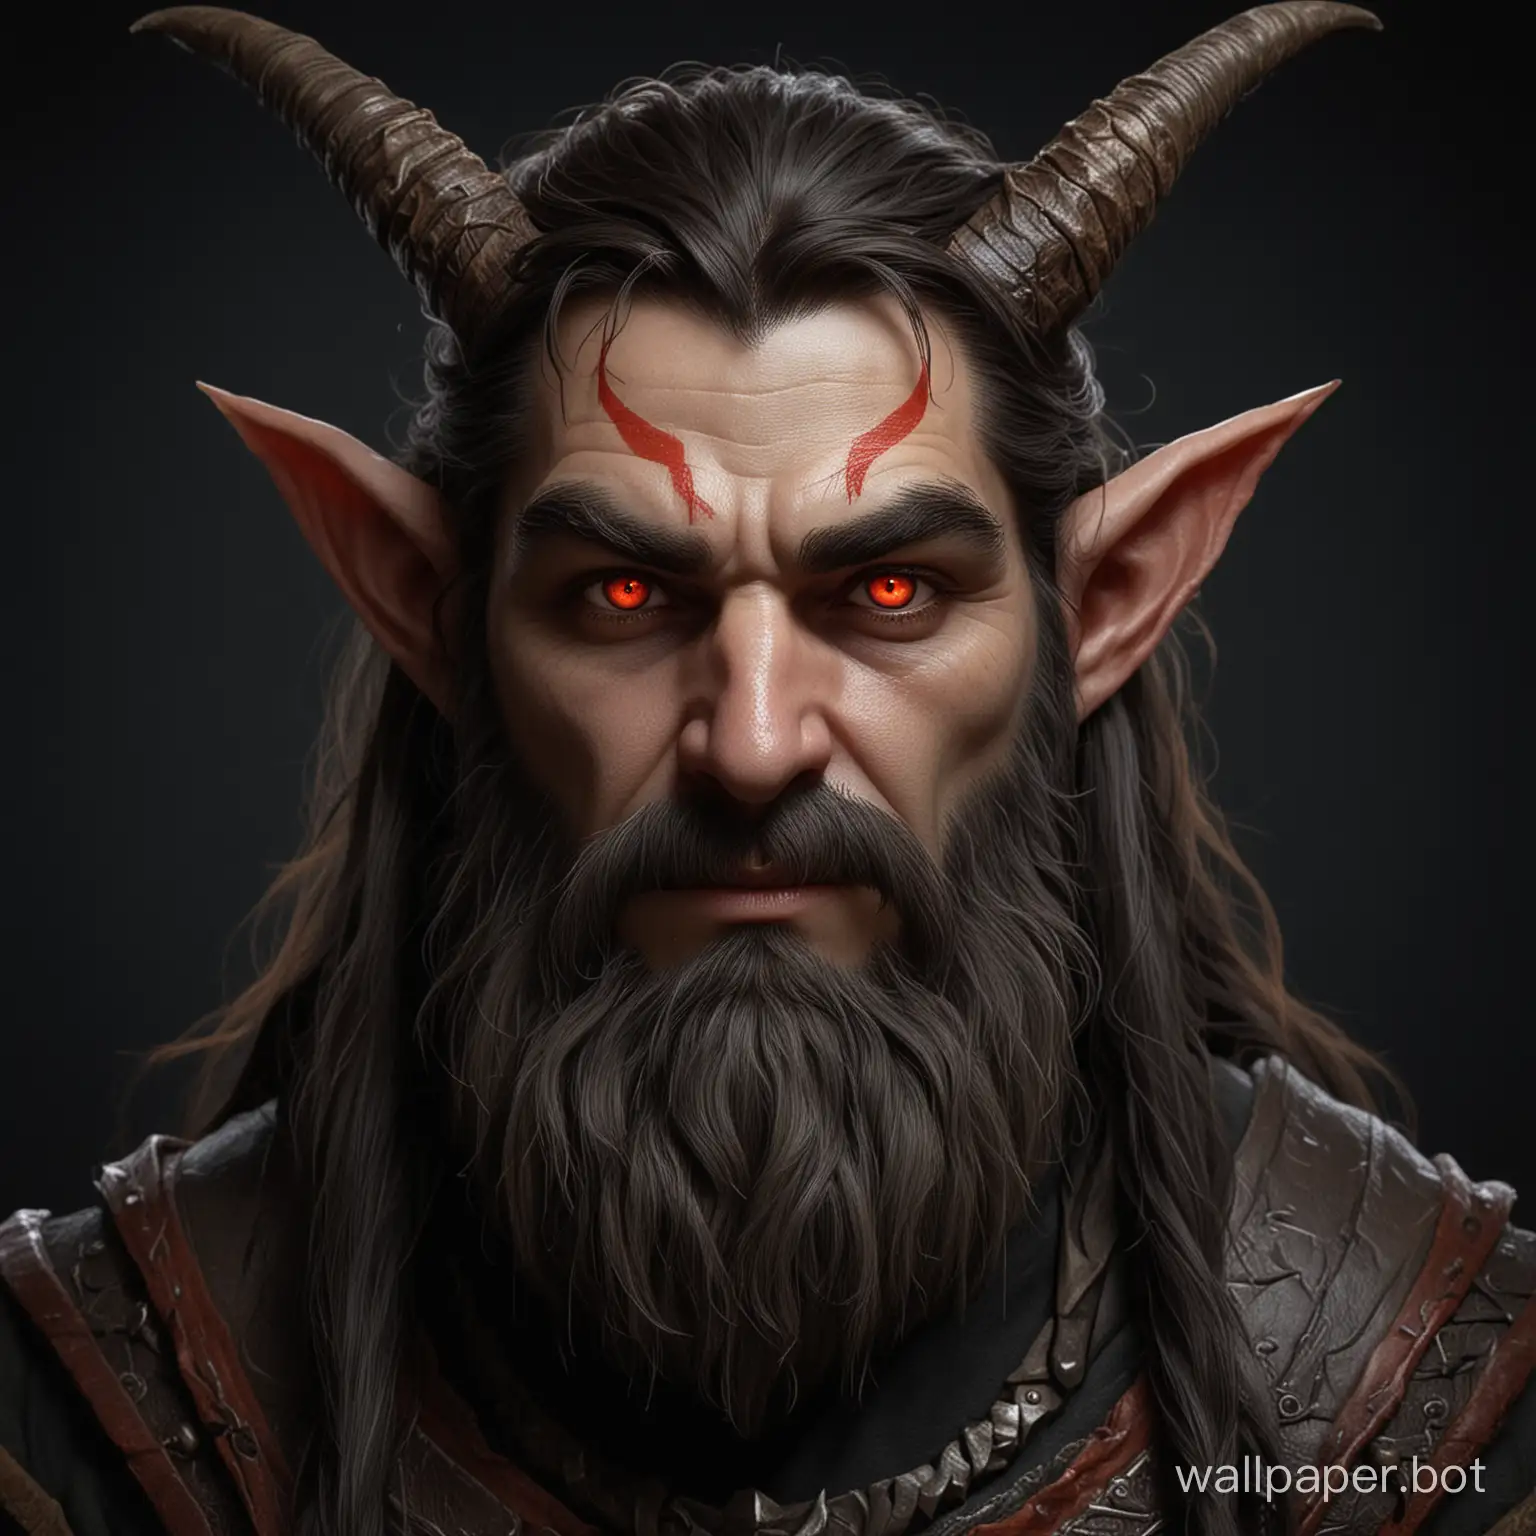 Alp - a mythological creature, a spirit of mountains, related to elves, dwarves, and kobolds. Outwardly resembling a human, but with a number of differences: pointed ears, horns, hooves, waist-length hair and beard, red eyes. The appearance resembles a devil. Draw it on a black background.